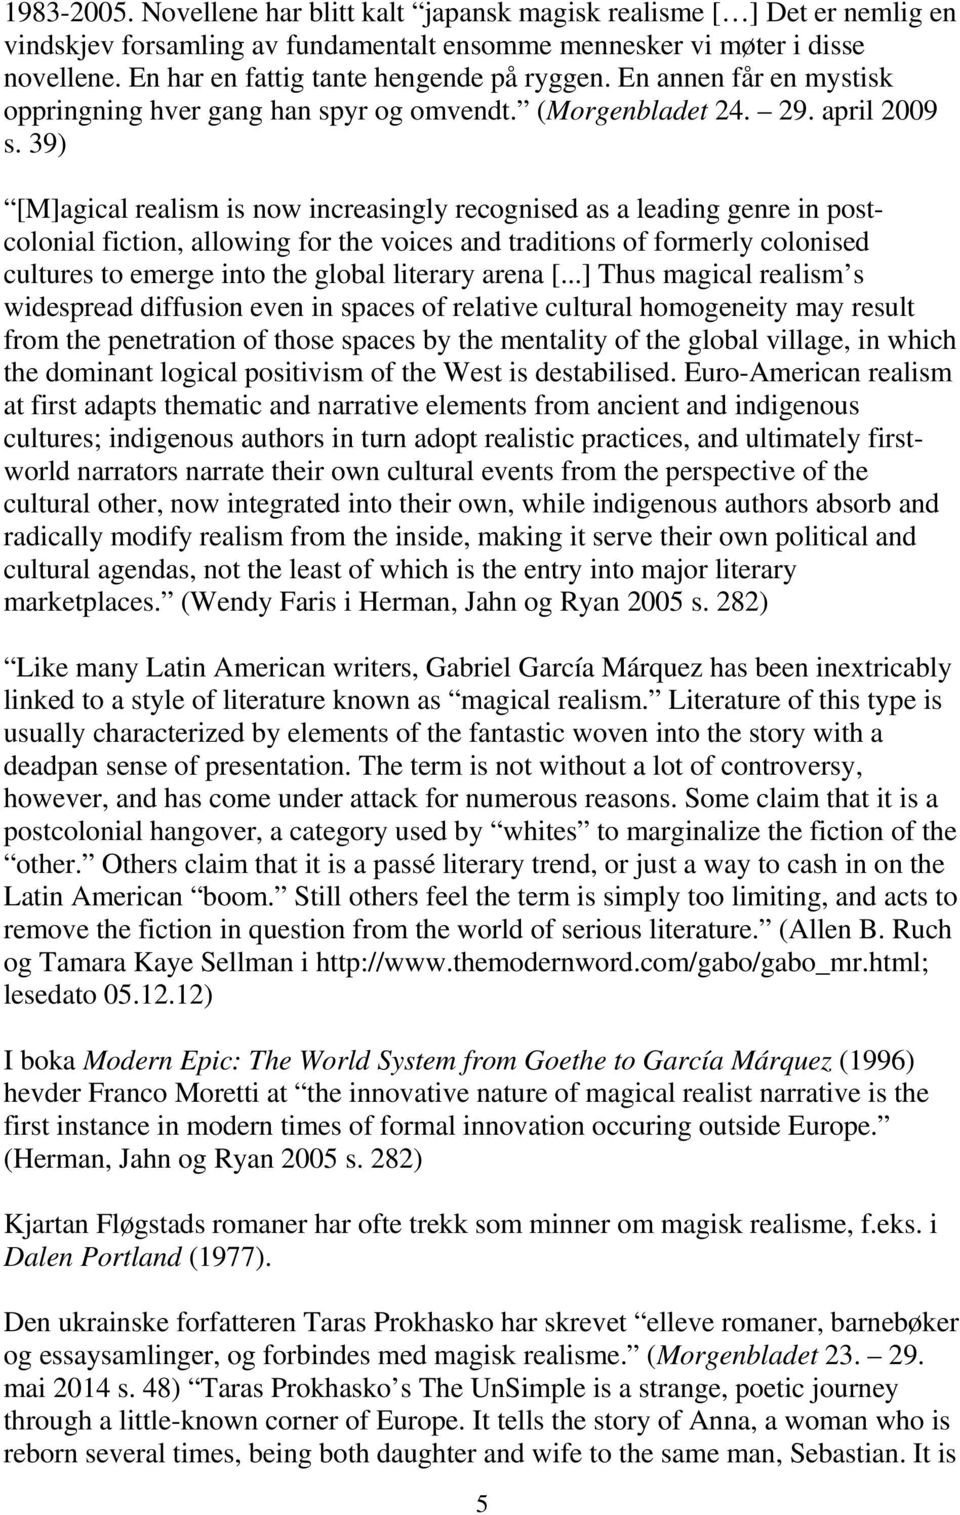 39) [M]agical realism is now increasingly recognised as a leading genre in postcolonial fiction, allowing for the voices and traditions of formerly colonised cultures to emerge into the global